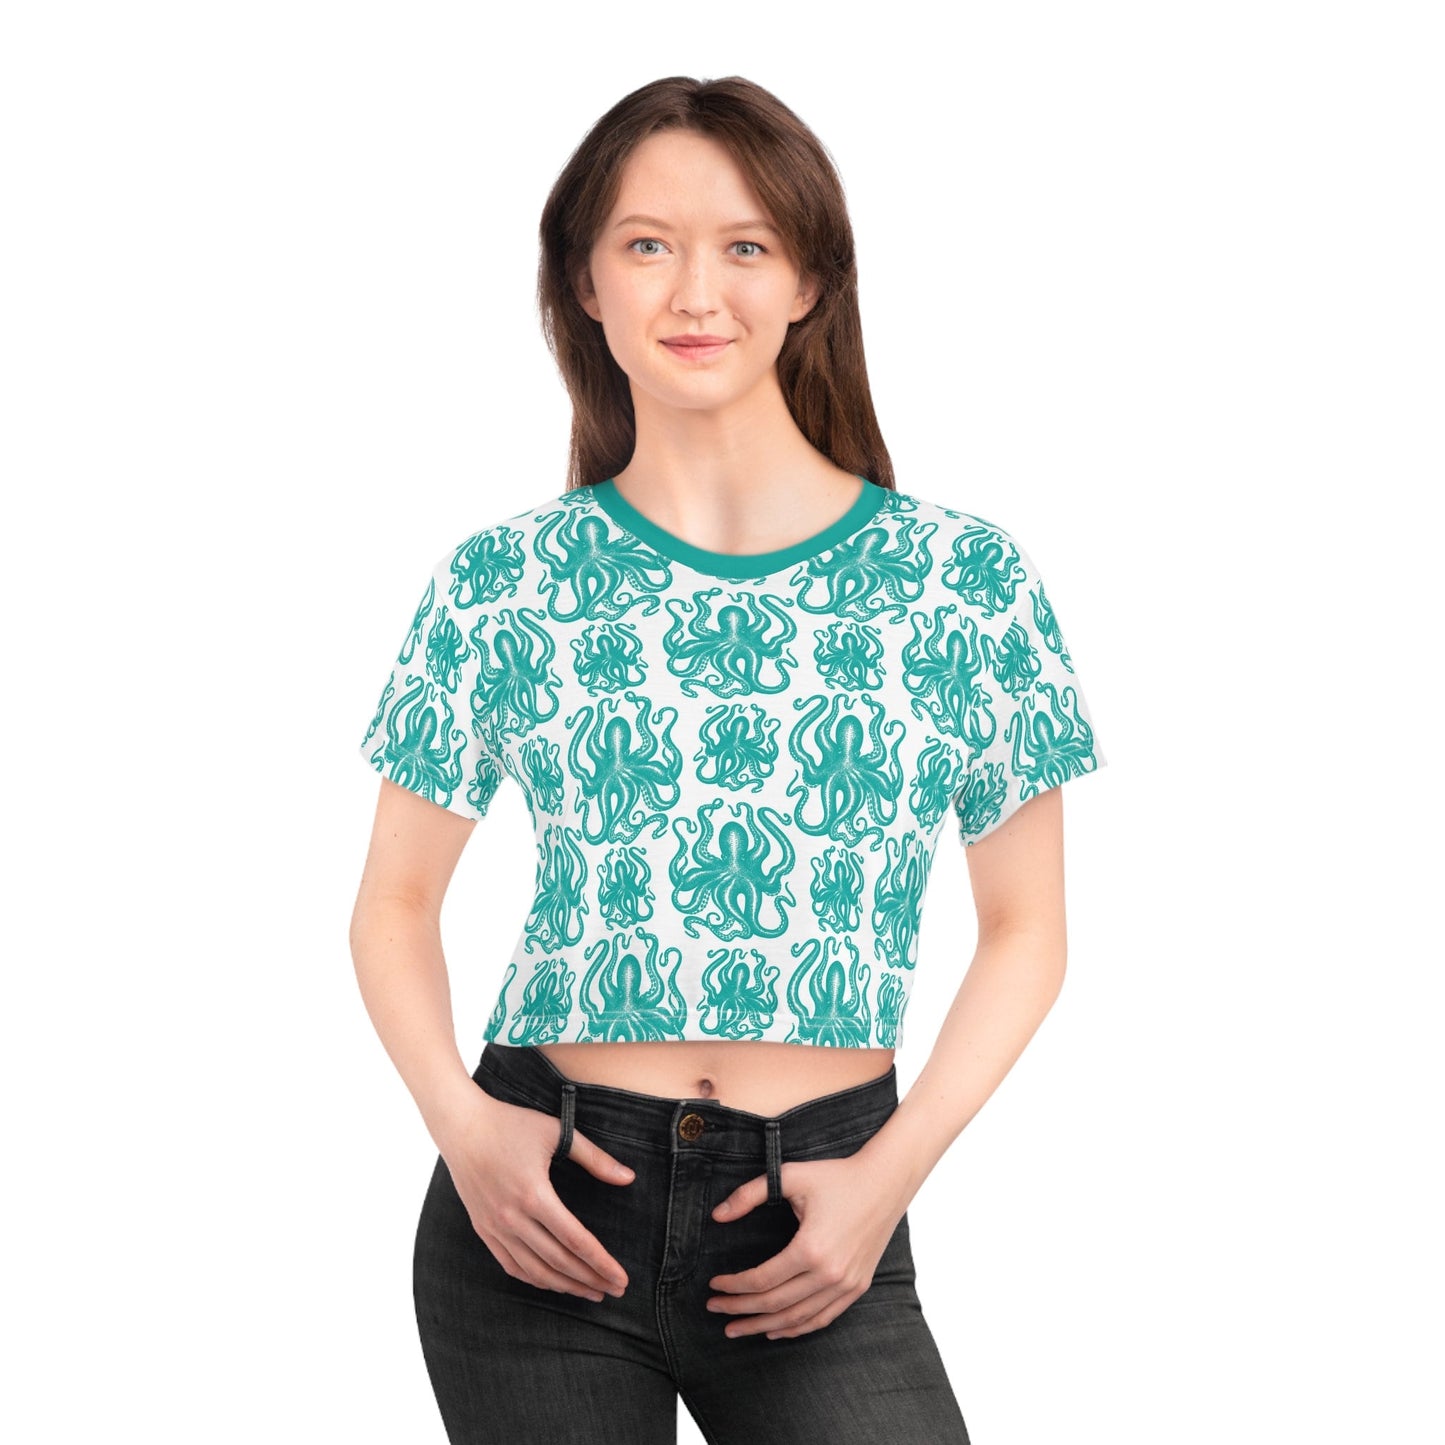 Summer Aqua Octopus Crop Tee - Trendy, Casual, and Comfortable! Crop tee with Octopus Art, Fashionable and functional. Octopus Print Tee